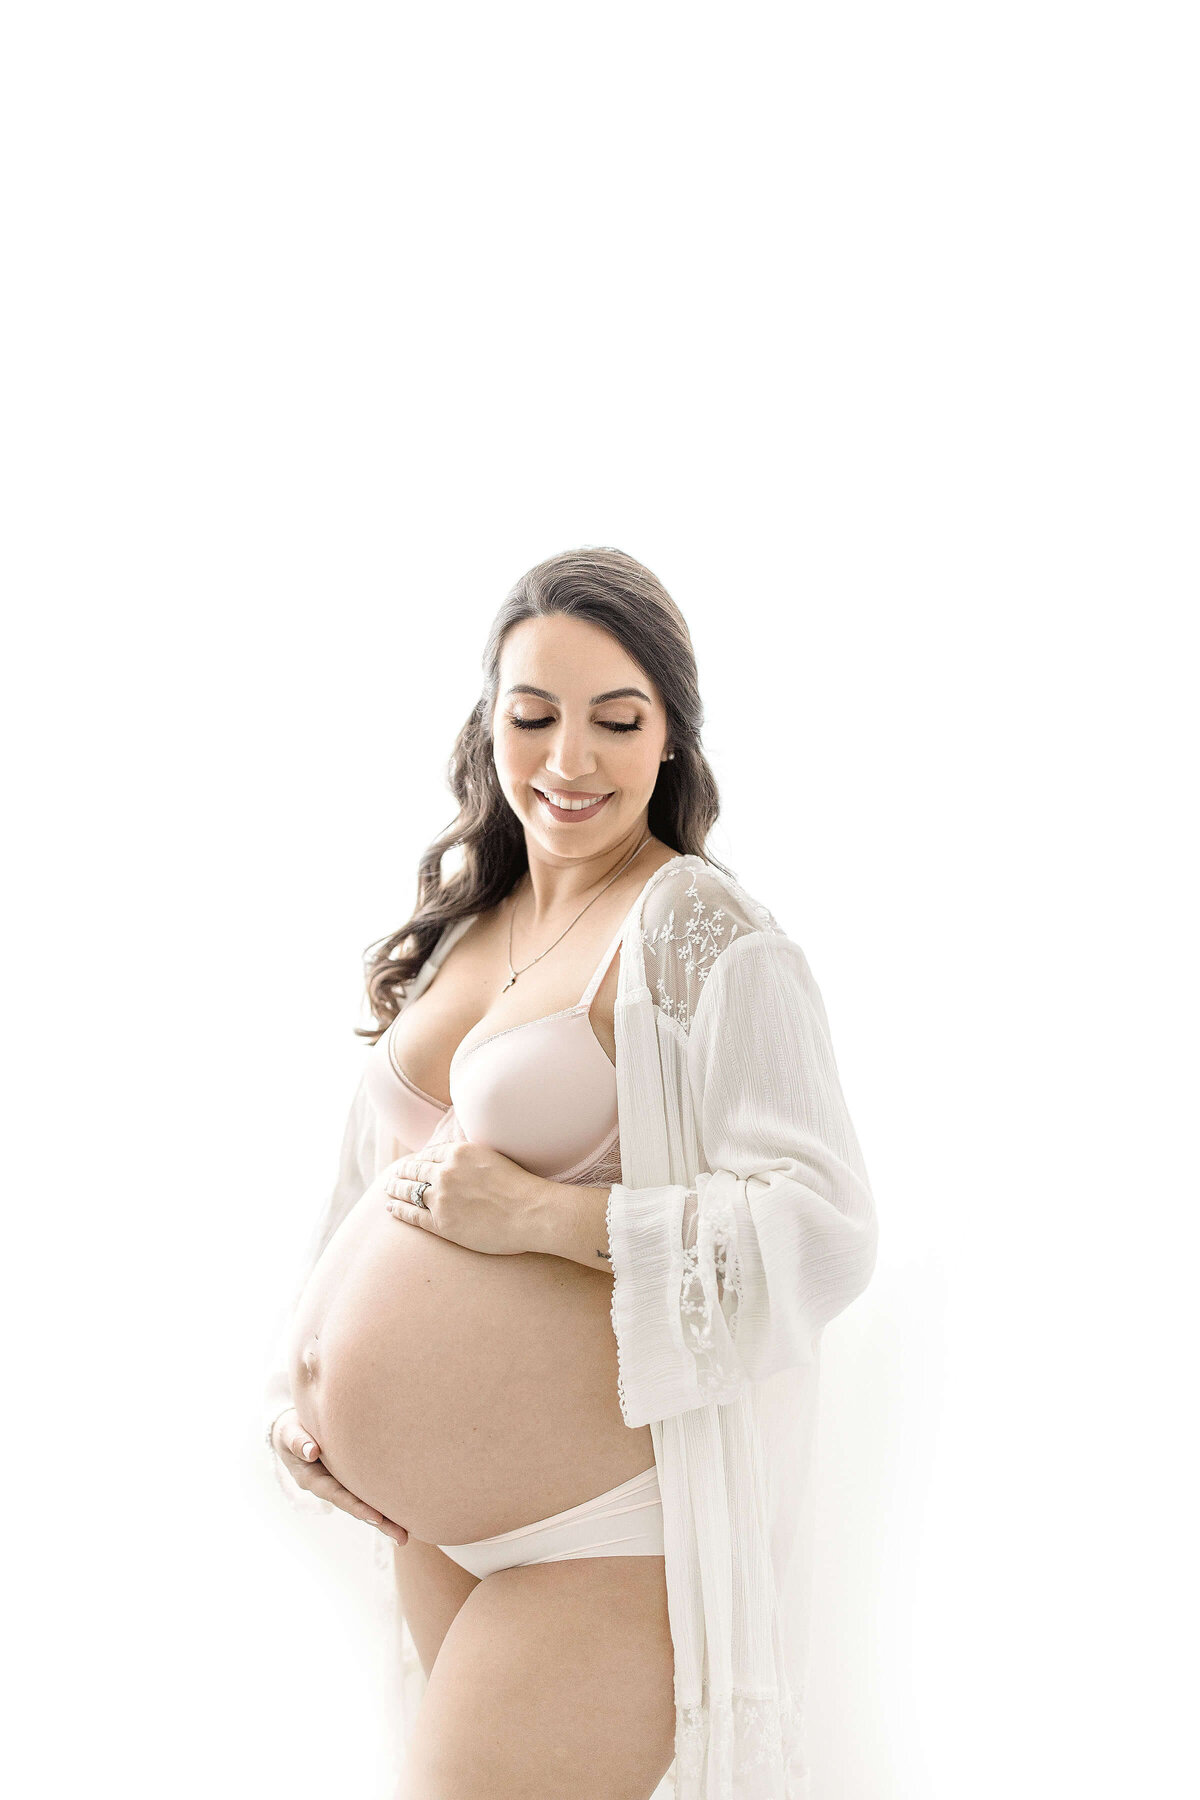 fort-lauderdale-maternity-photography_0012